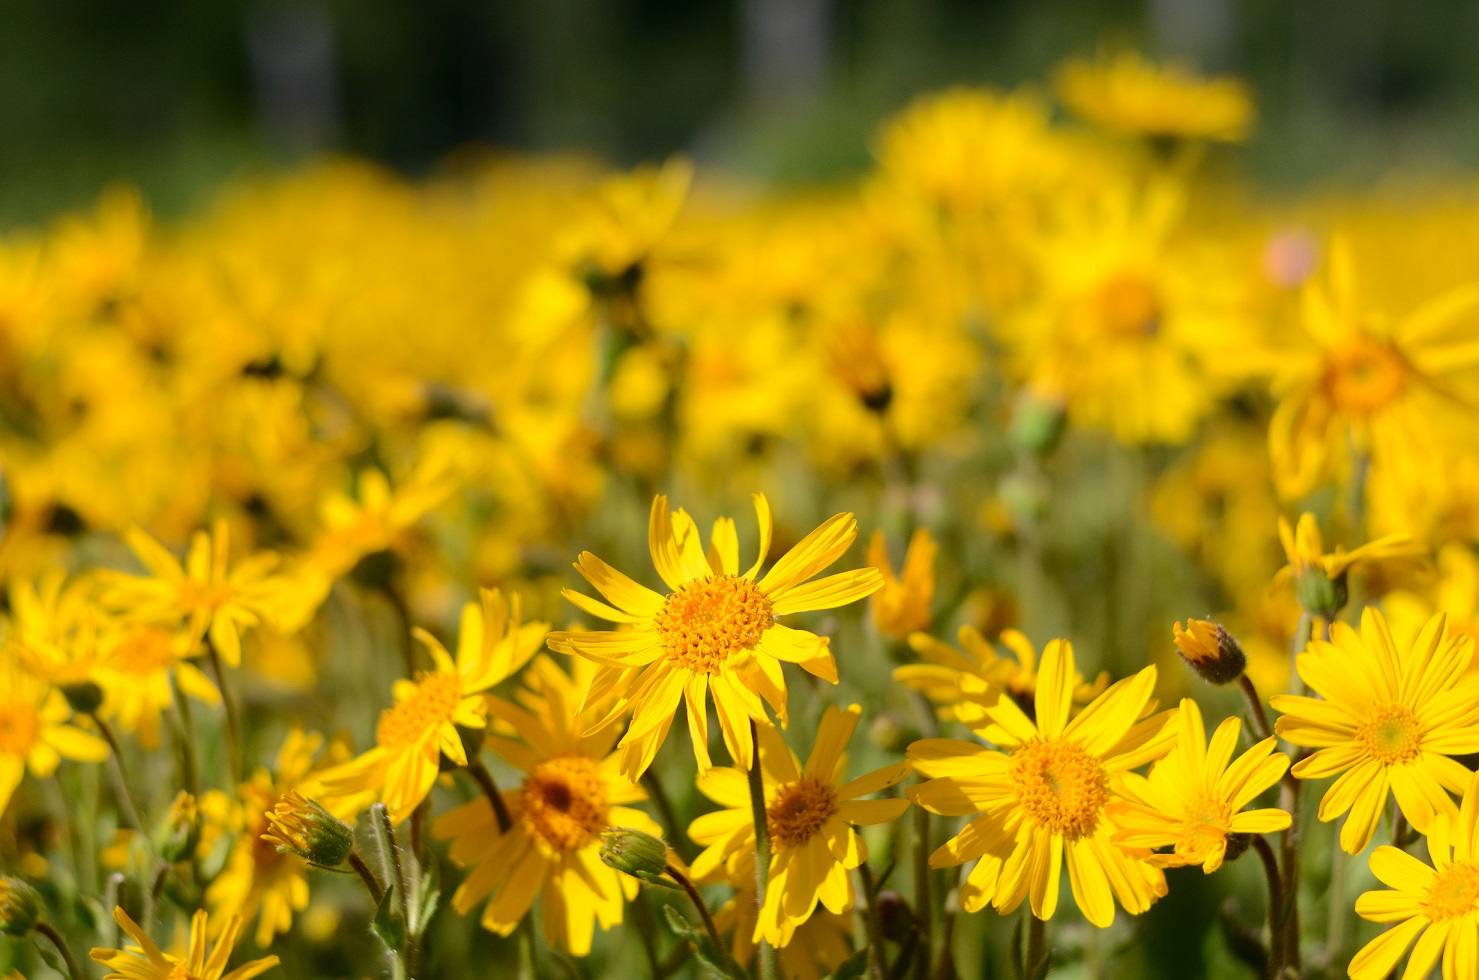 Medicinal plants: Arnica relieves inflammation and promotes wound healing